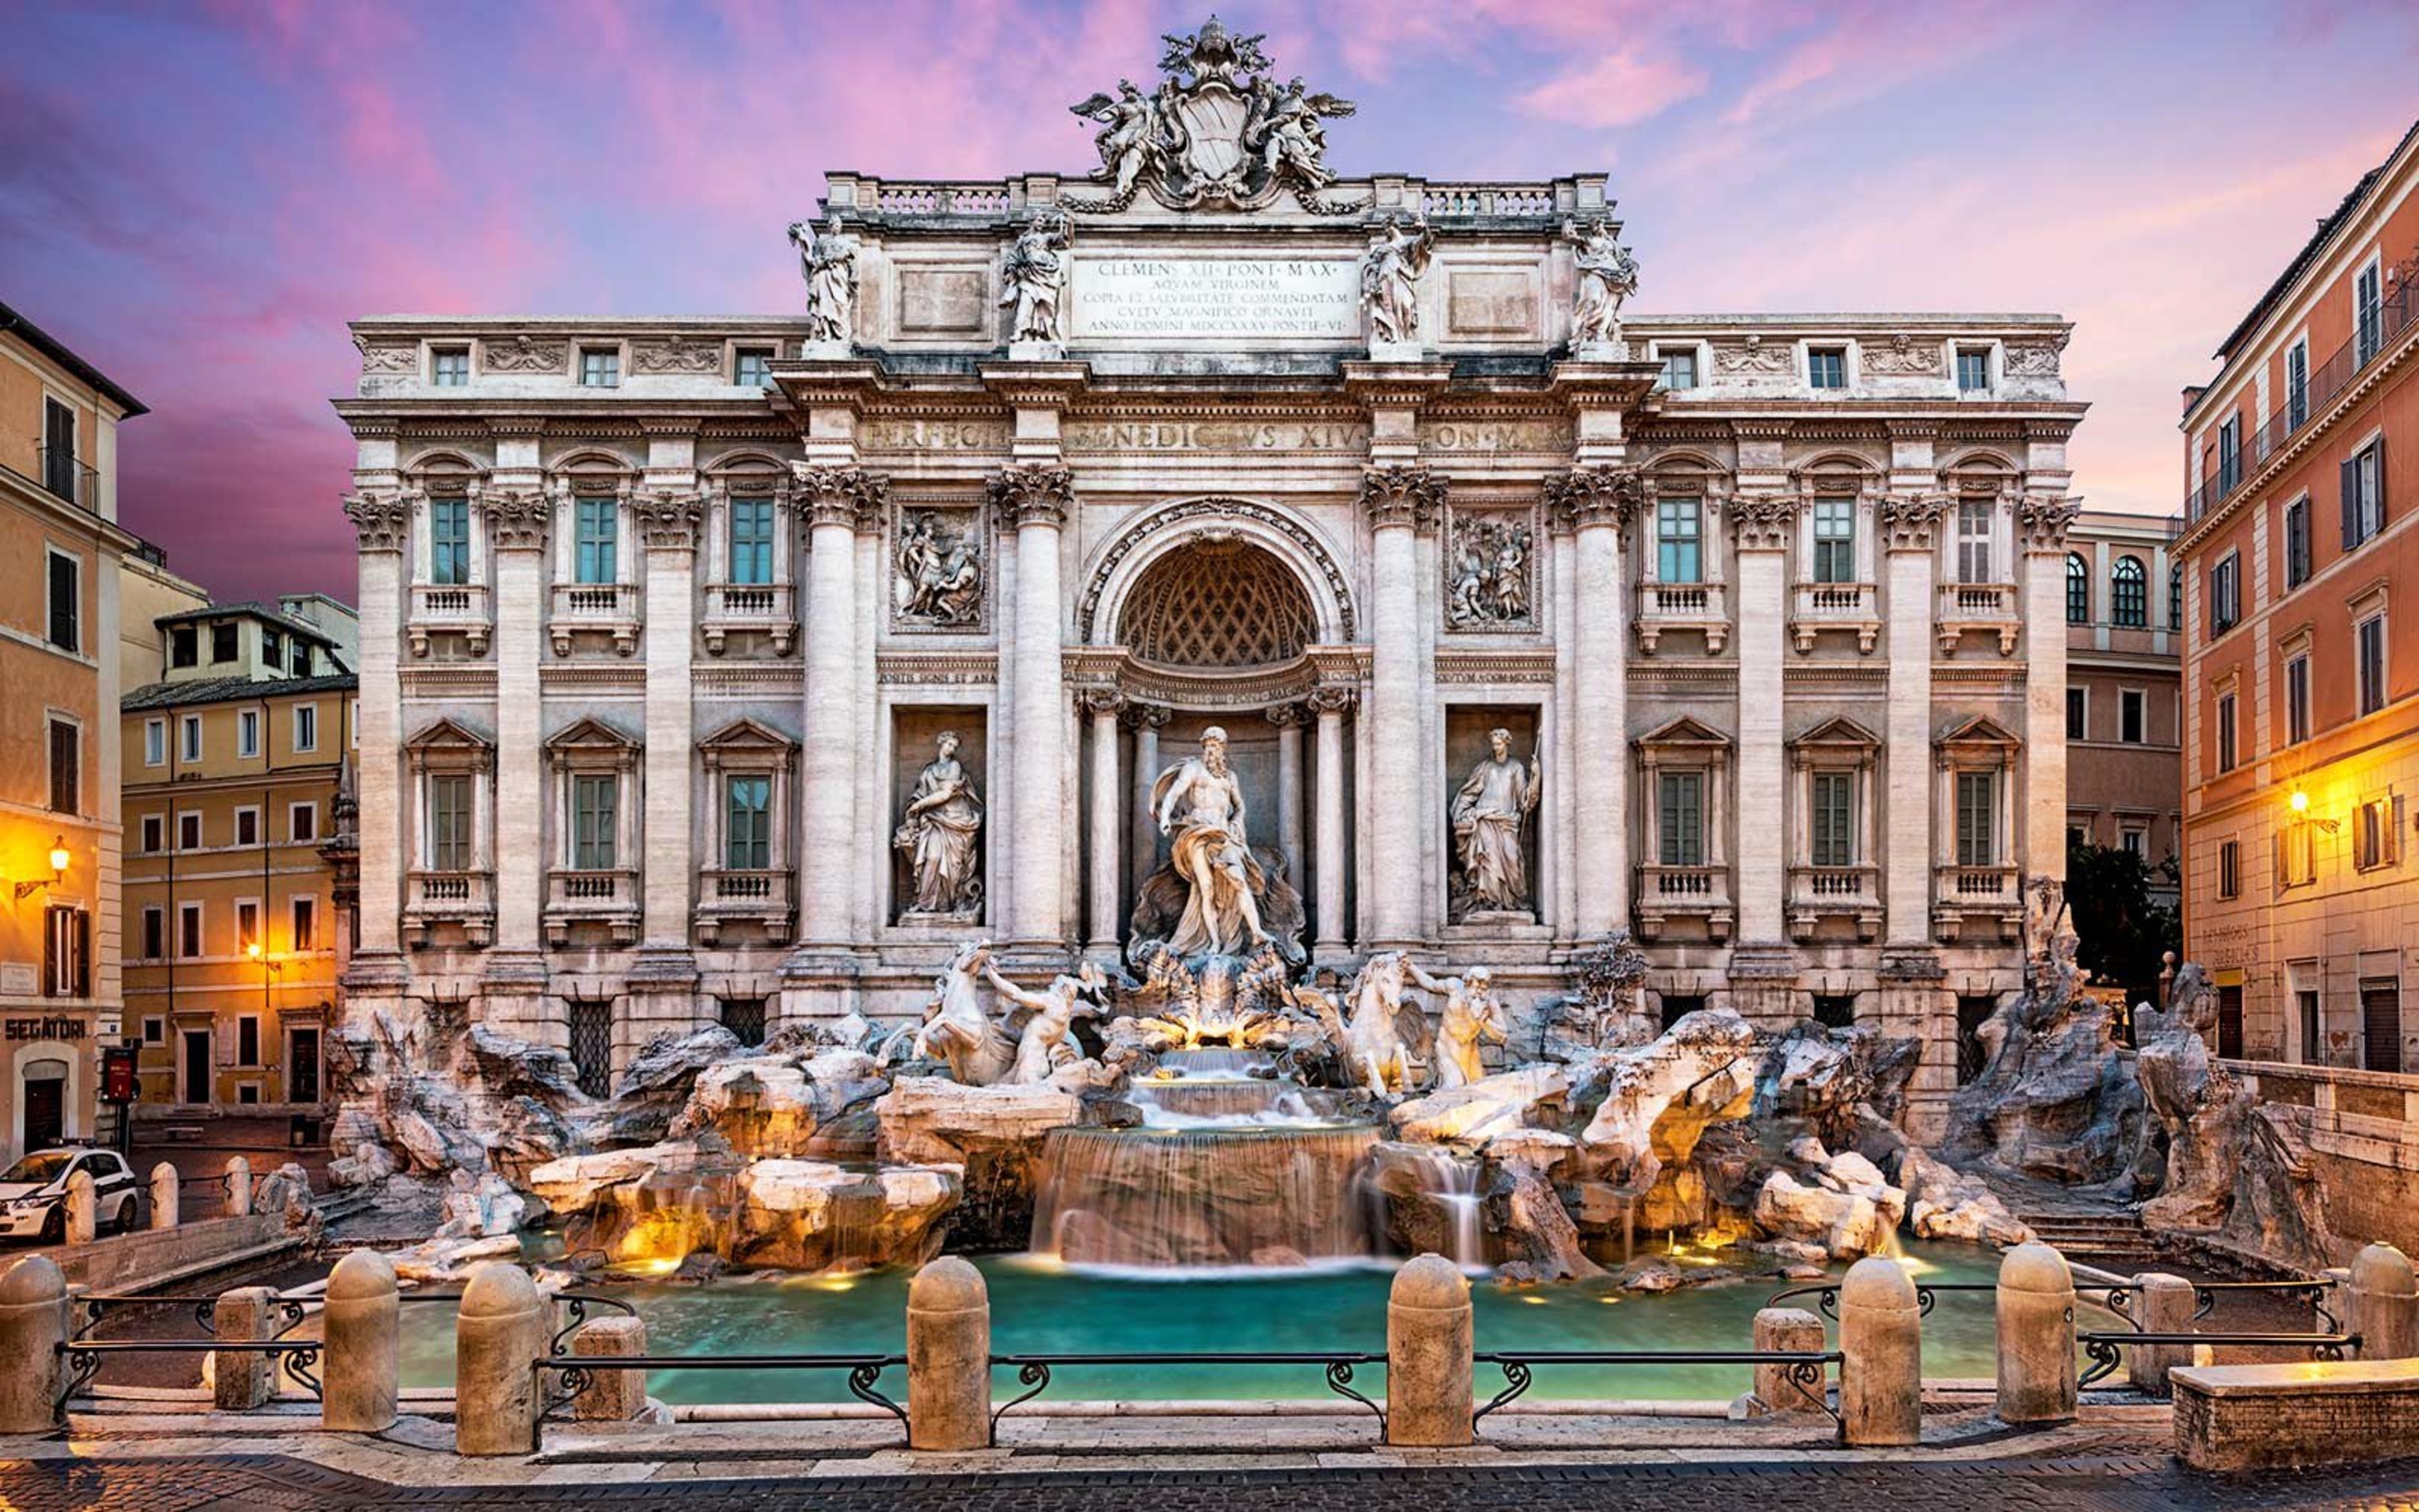 <p>Often referred to as "The Three Street Fountain," the Trevi Fountain is an excellent example of the city's regional art. Located at the intersection of three streets, this fountain draws in visitors from all sides of Rome. Its statues are a lineup of masterpieces from Nicola Salvi, but the real reason everyone is here is because of Federico Fellini, who shot the famous scene of Marcello Mastroianni and Anita Ekberg lapping in the pool at midnight. </p><p>You may also like: <a href='https://www.yardbarker.com/lifestyle/articles/20_foolproof_crockpot_dump_recipes_you_can_try_010224/s1__39117815'>20 foolproof crockpot dump recipes you can try</a></p>